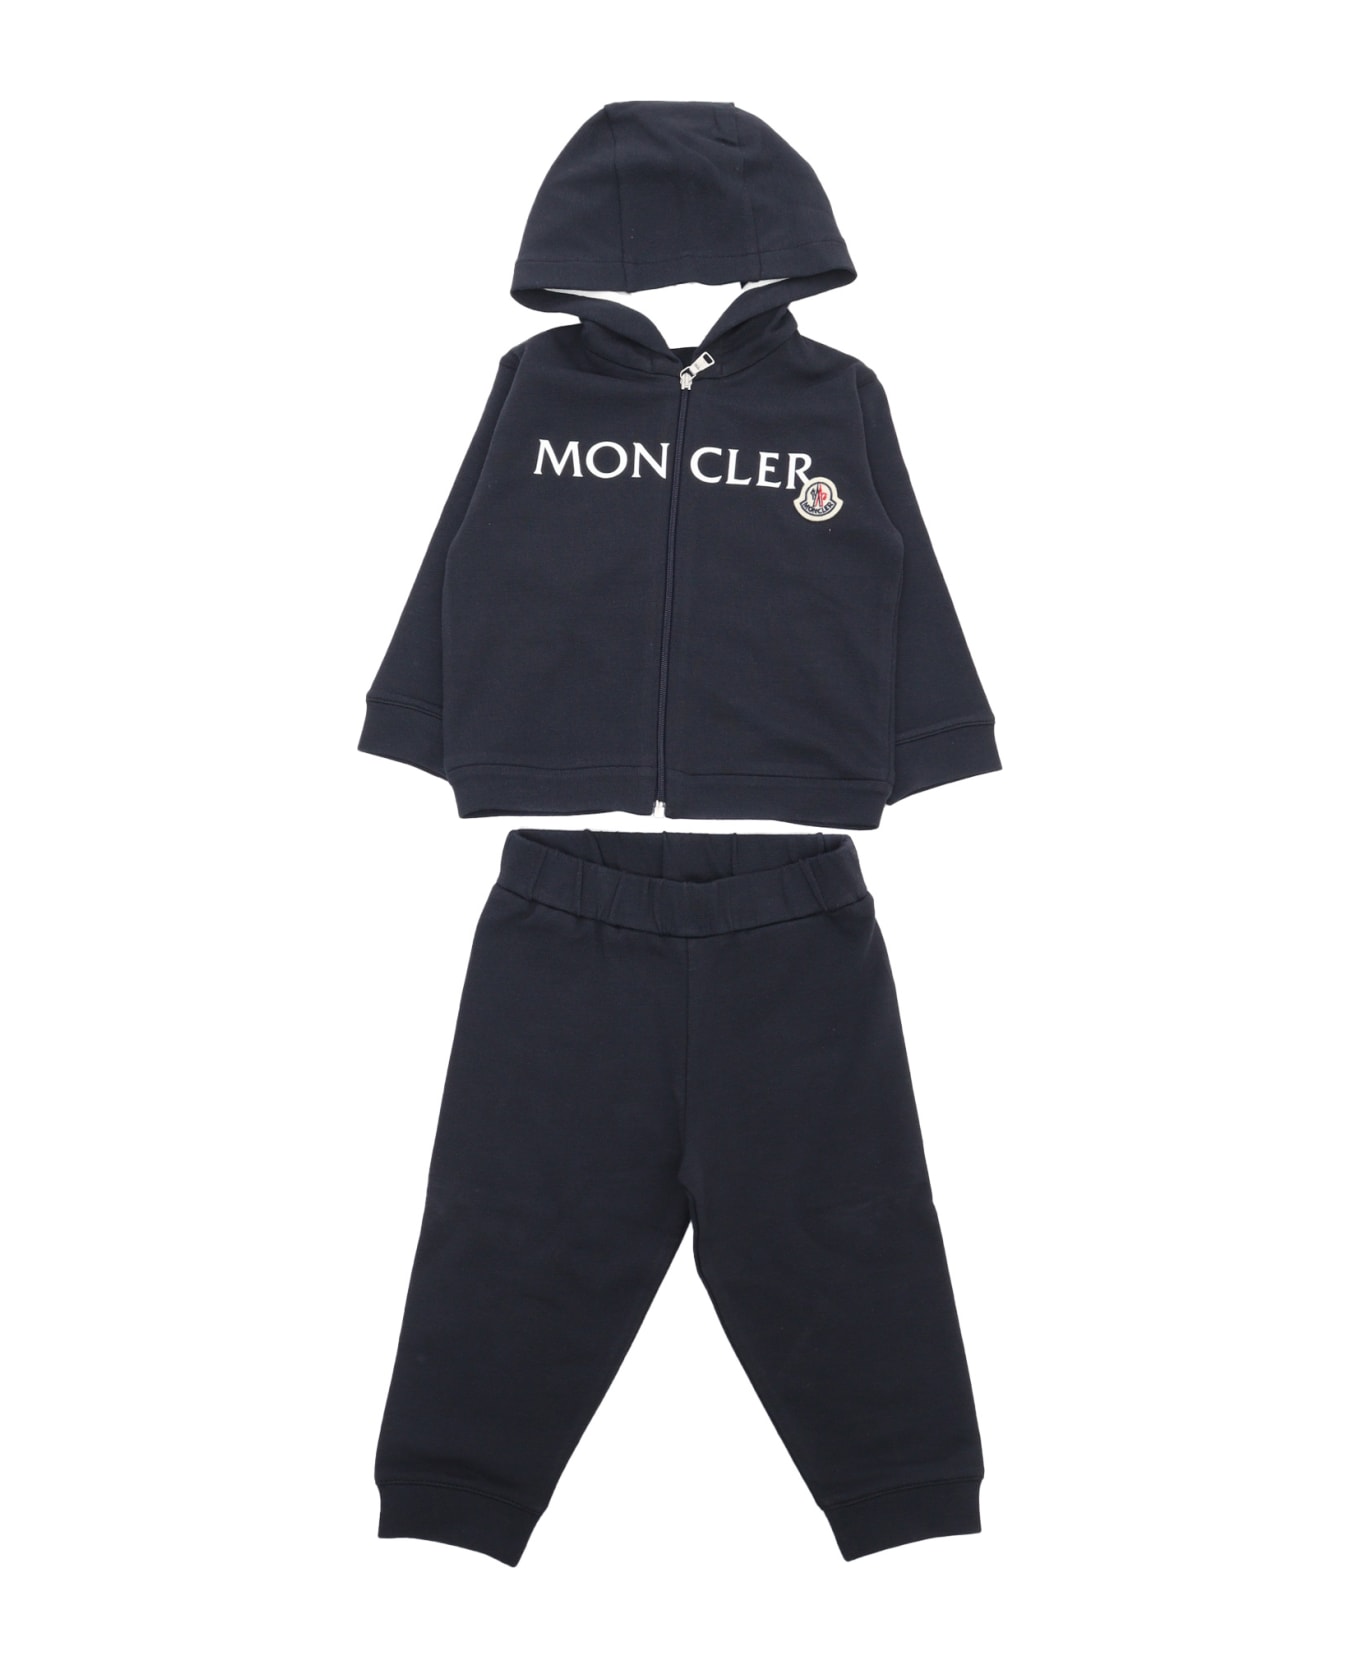 Moncler 2 Piece Sportive Suite - BLUE アクセサリー＆ギフト